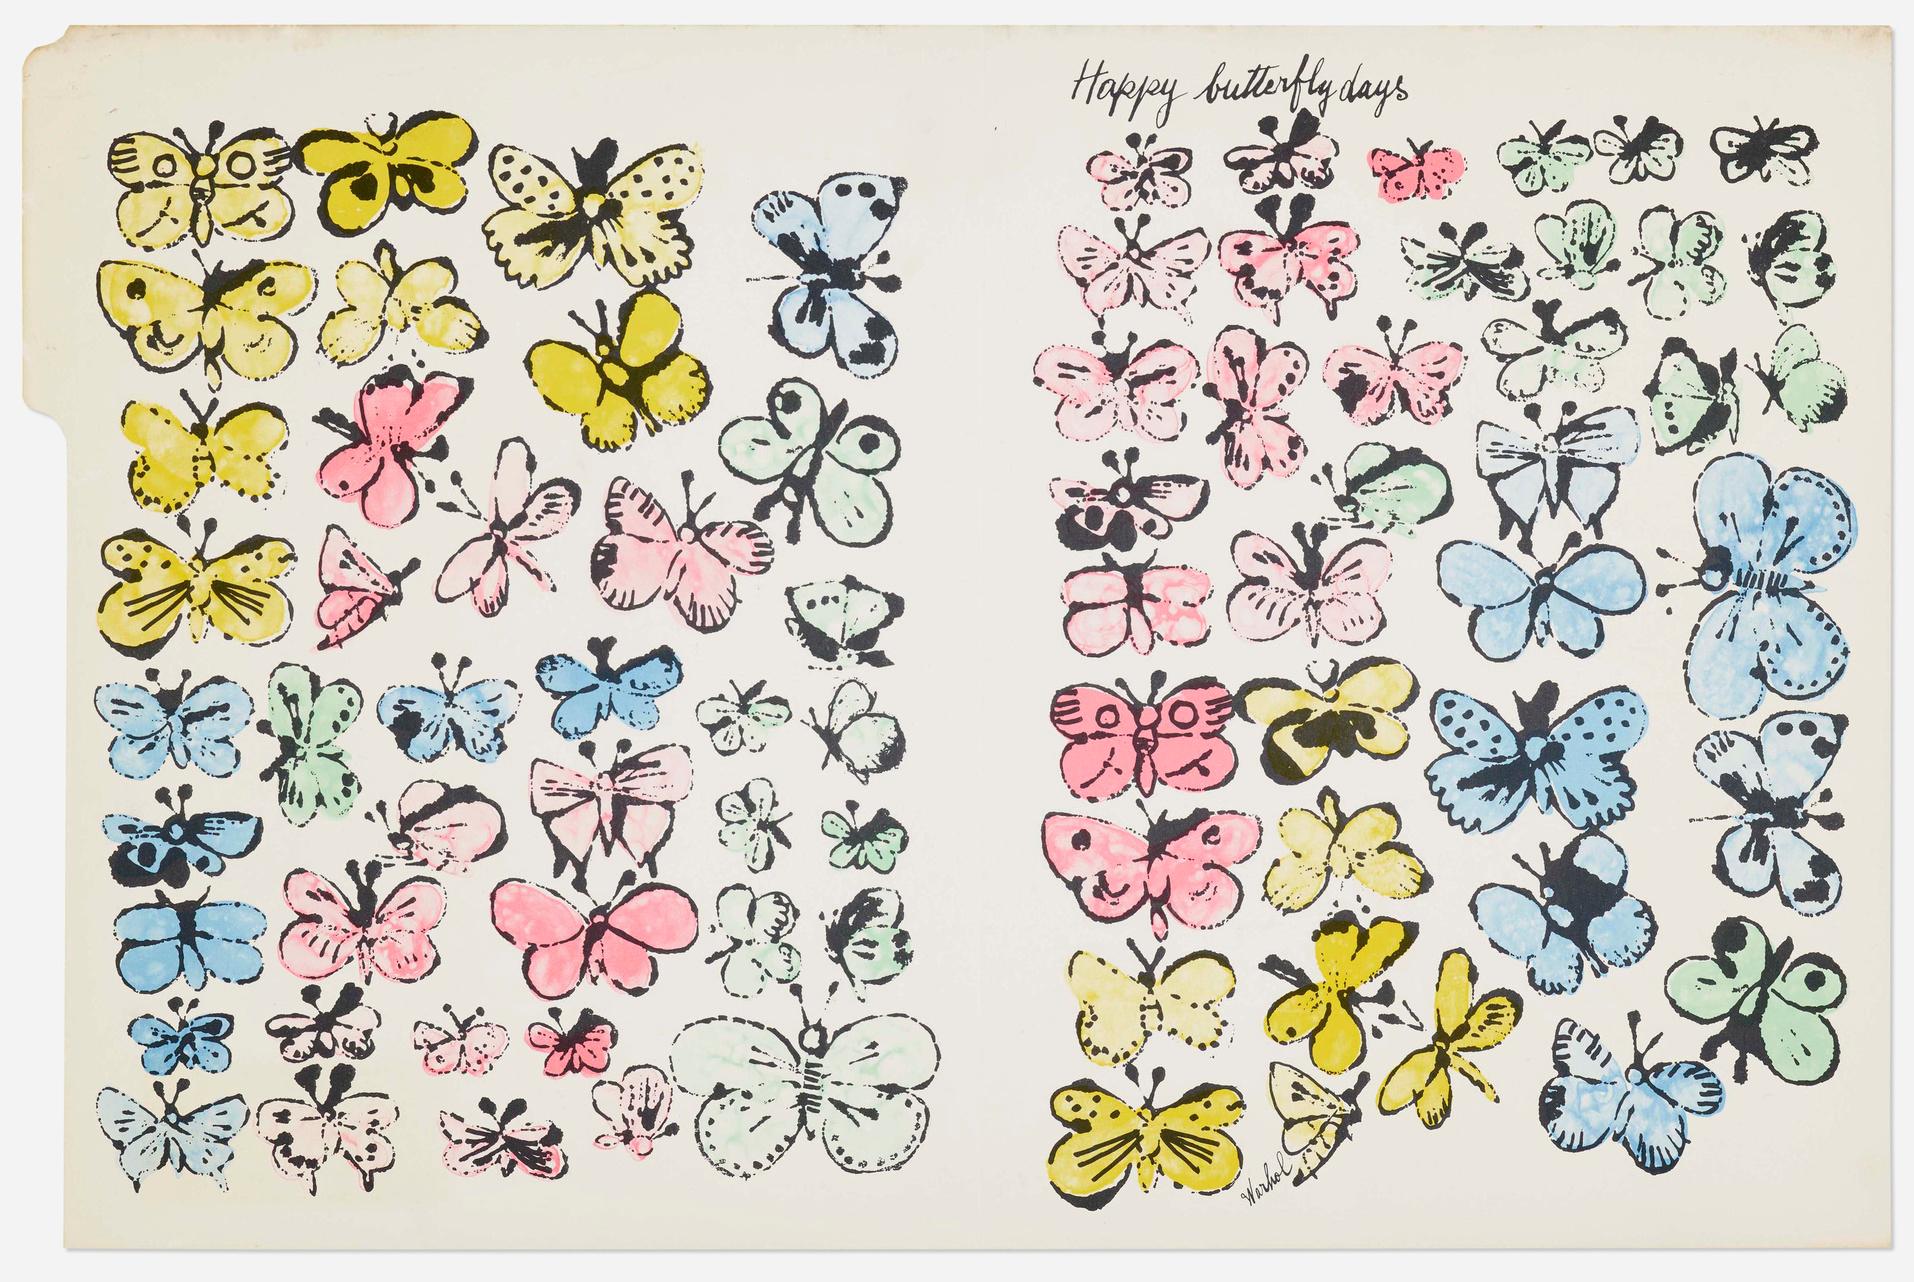 Andy Warhol 'Happy Butterfly Days' Offset Lithograph with Hand Coloring 1955